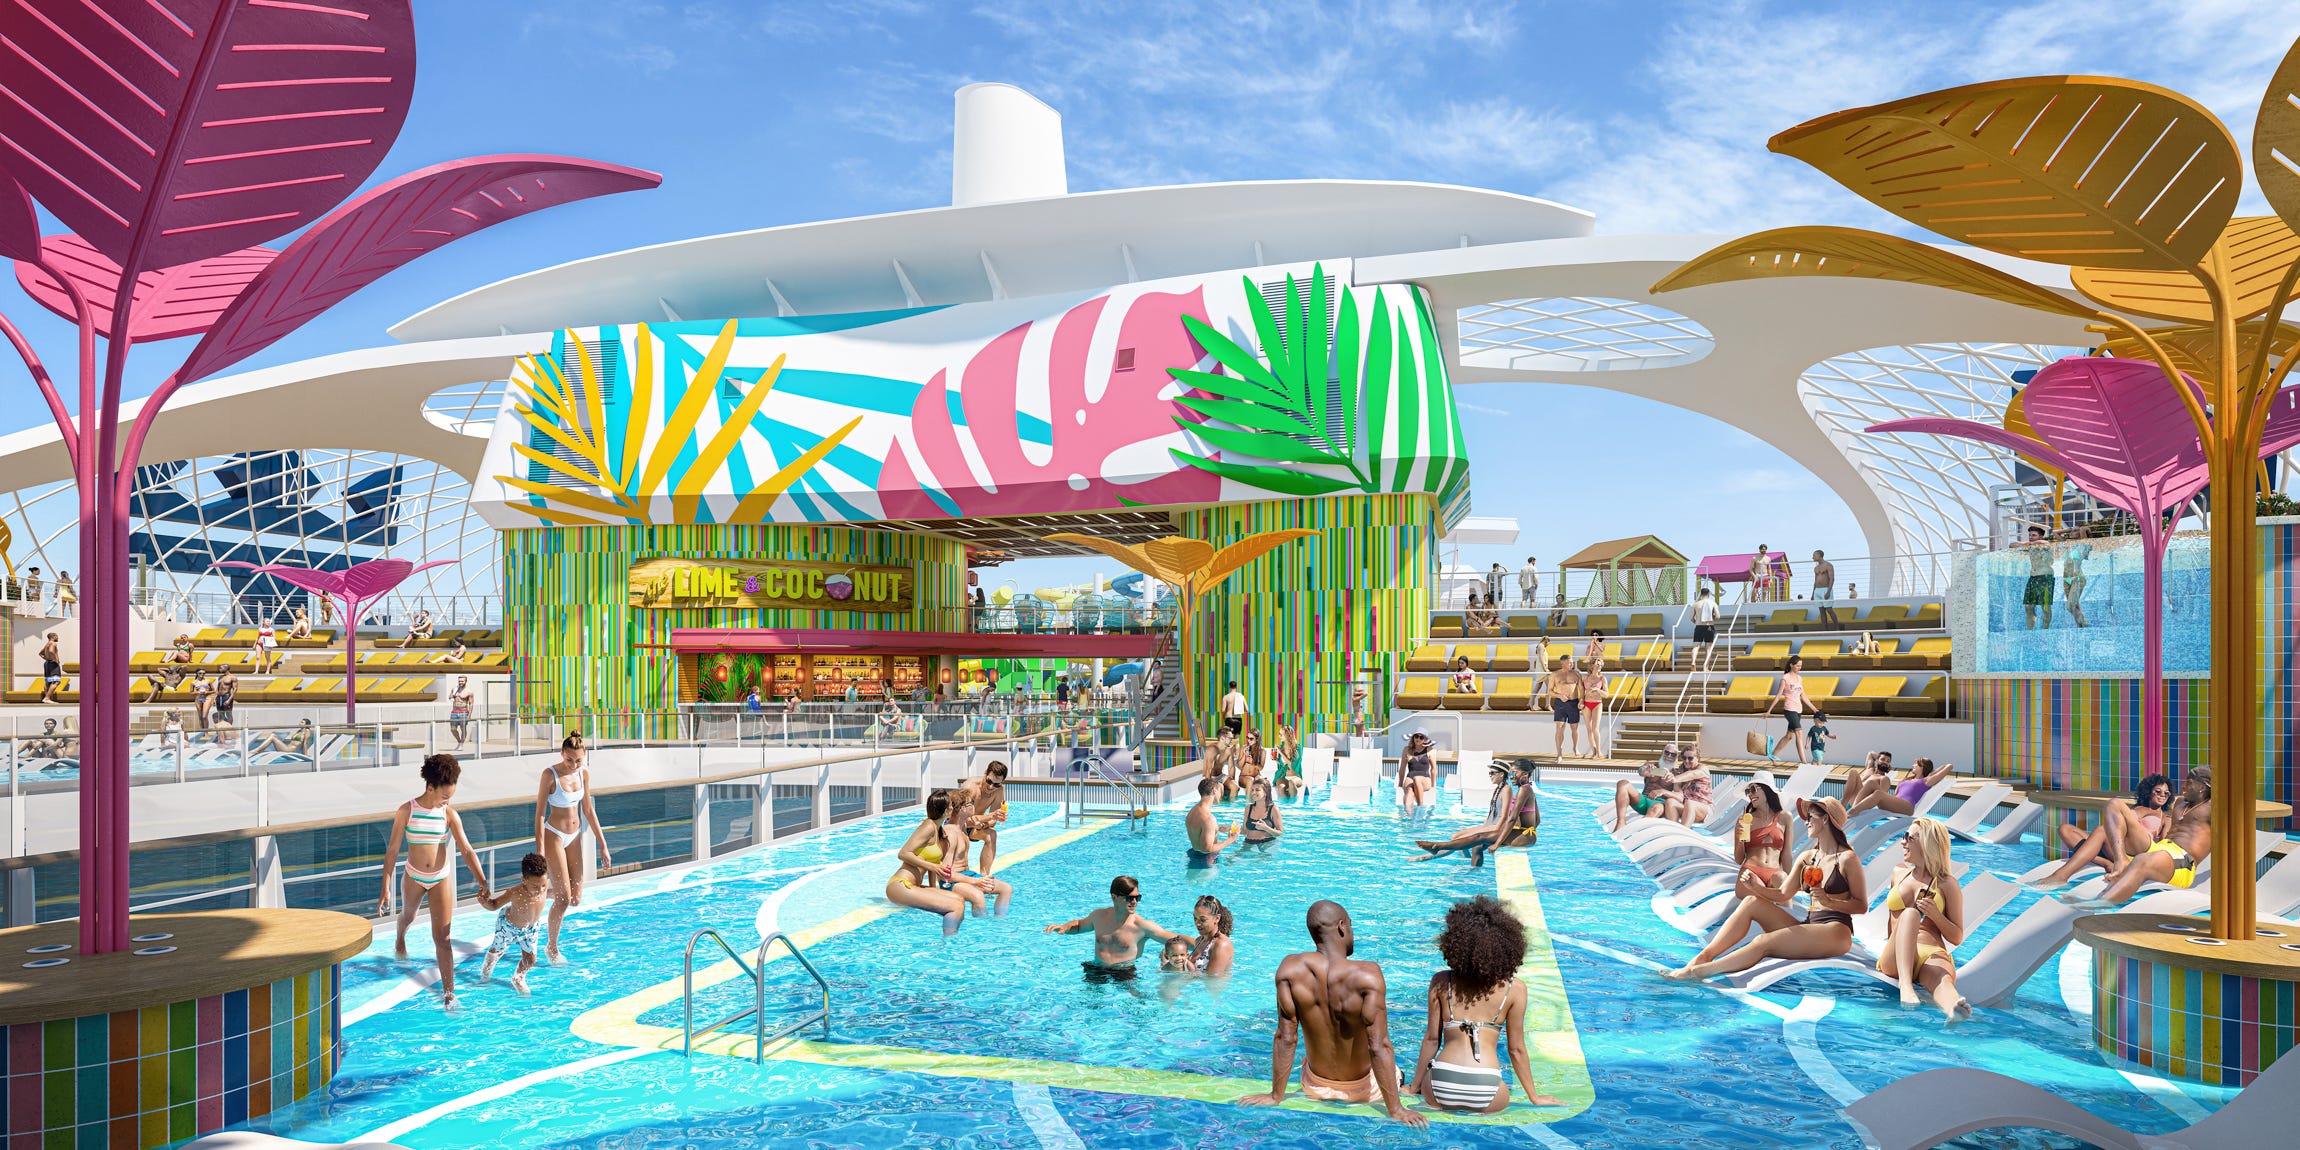 <p>Why have one pool when you can have five? The cruise line says it's adding five swimming holes, eight hot tubs, and three water slides to the upcoming vessel.</p><p>While not family-friendly, gamblers will be overjoyed to see two casinos, totaling more than 370 slot machines, in the plans. Because what's a <a href="https://www.businessinsider.com/cruise-industry-business-model-changing-bad-news-for-travelers-2023-4">cruise vacation without spending more money</a> than you anticipated?</p>